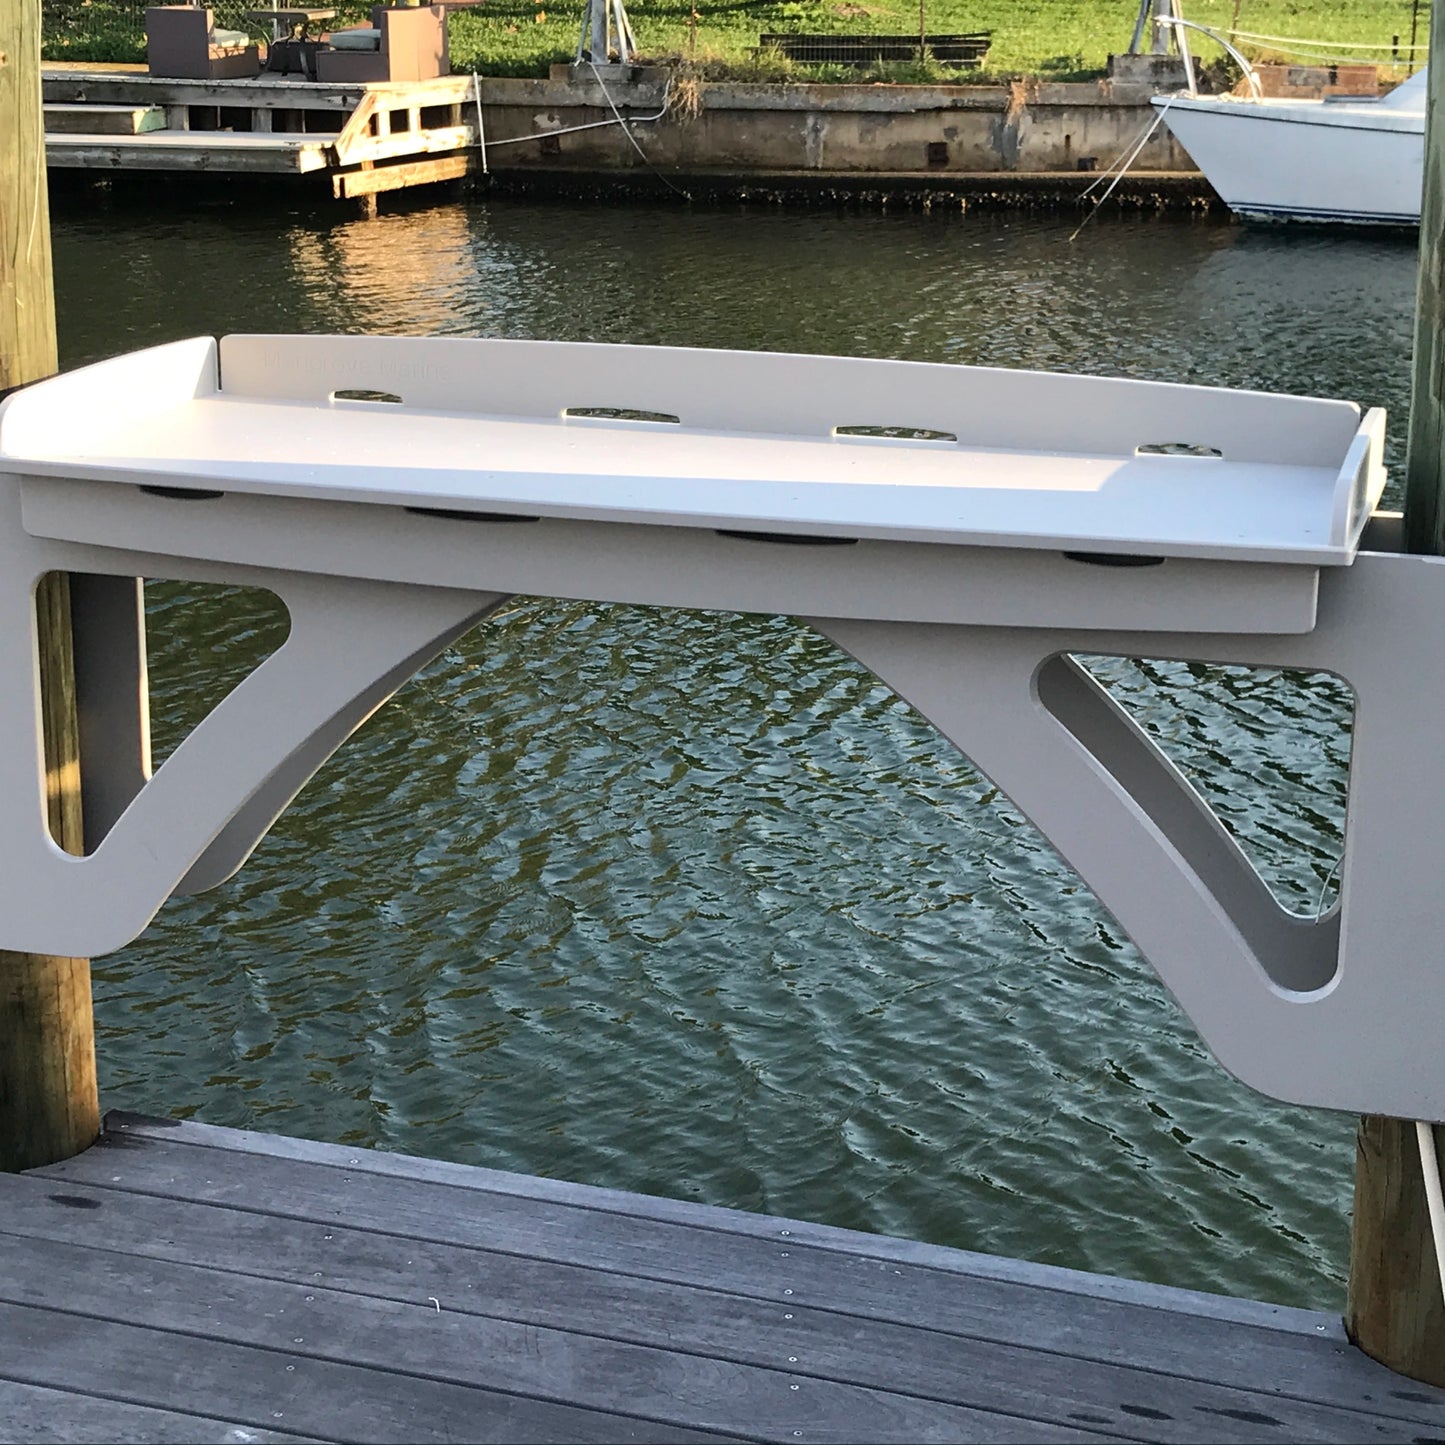 Mangrove Marine is your premium source for products that make your Marine Life better! Our piling mounted Dock Fillet Tables keep the fishy, slimy mess out where it belongs. Back-facing drainage hole with a Cantilever Design - No need to drill into deck. Includes 2 mounting brackets. A great gift for your favorite fishermen or women.